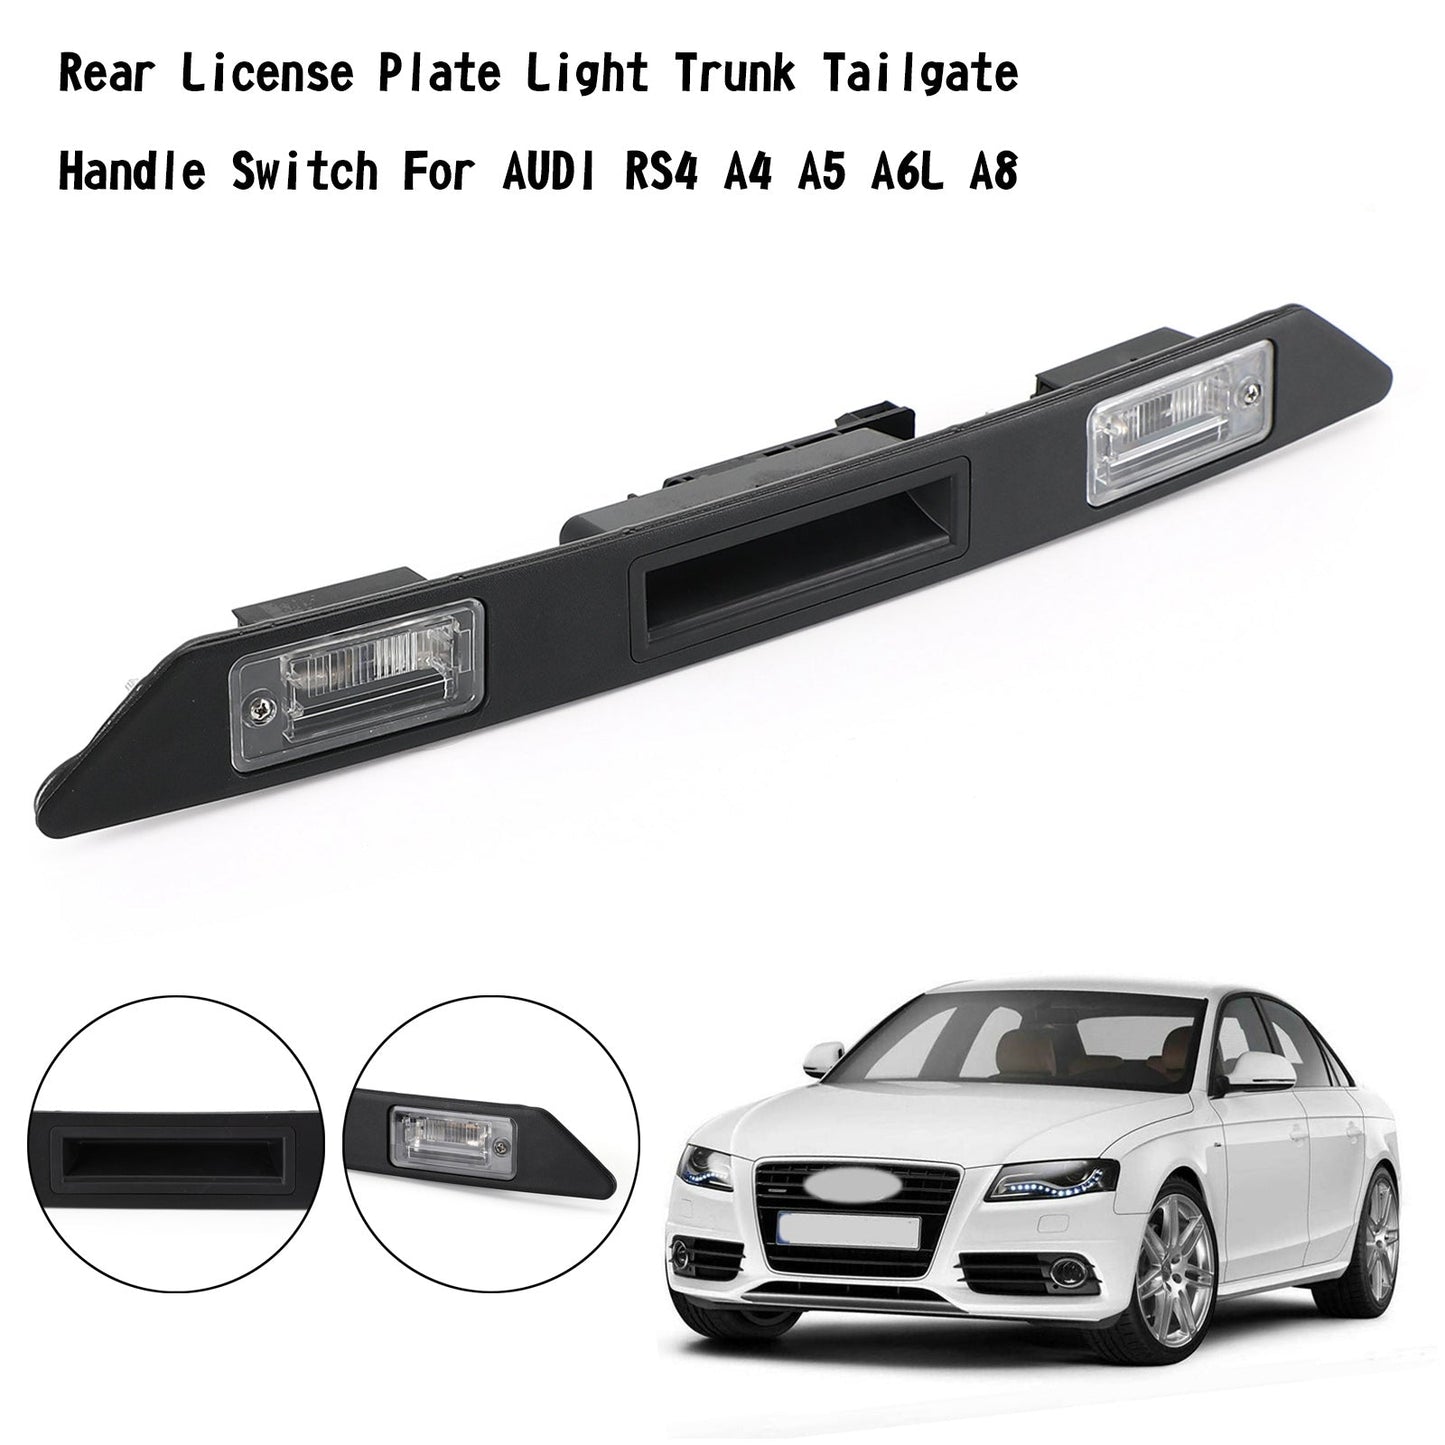 Rear License Plate Light Trunk Tailgate Handle Switch For AUDI A3 A4 A6 Q7